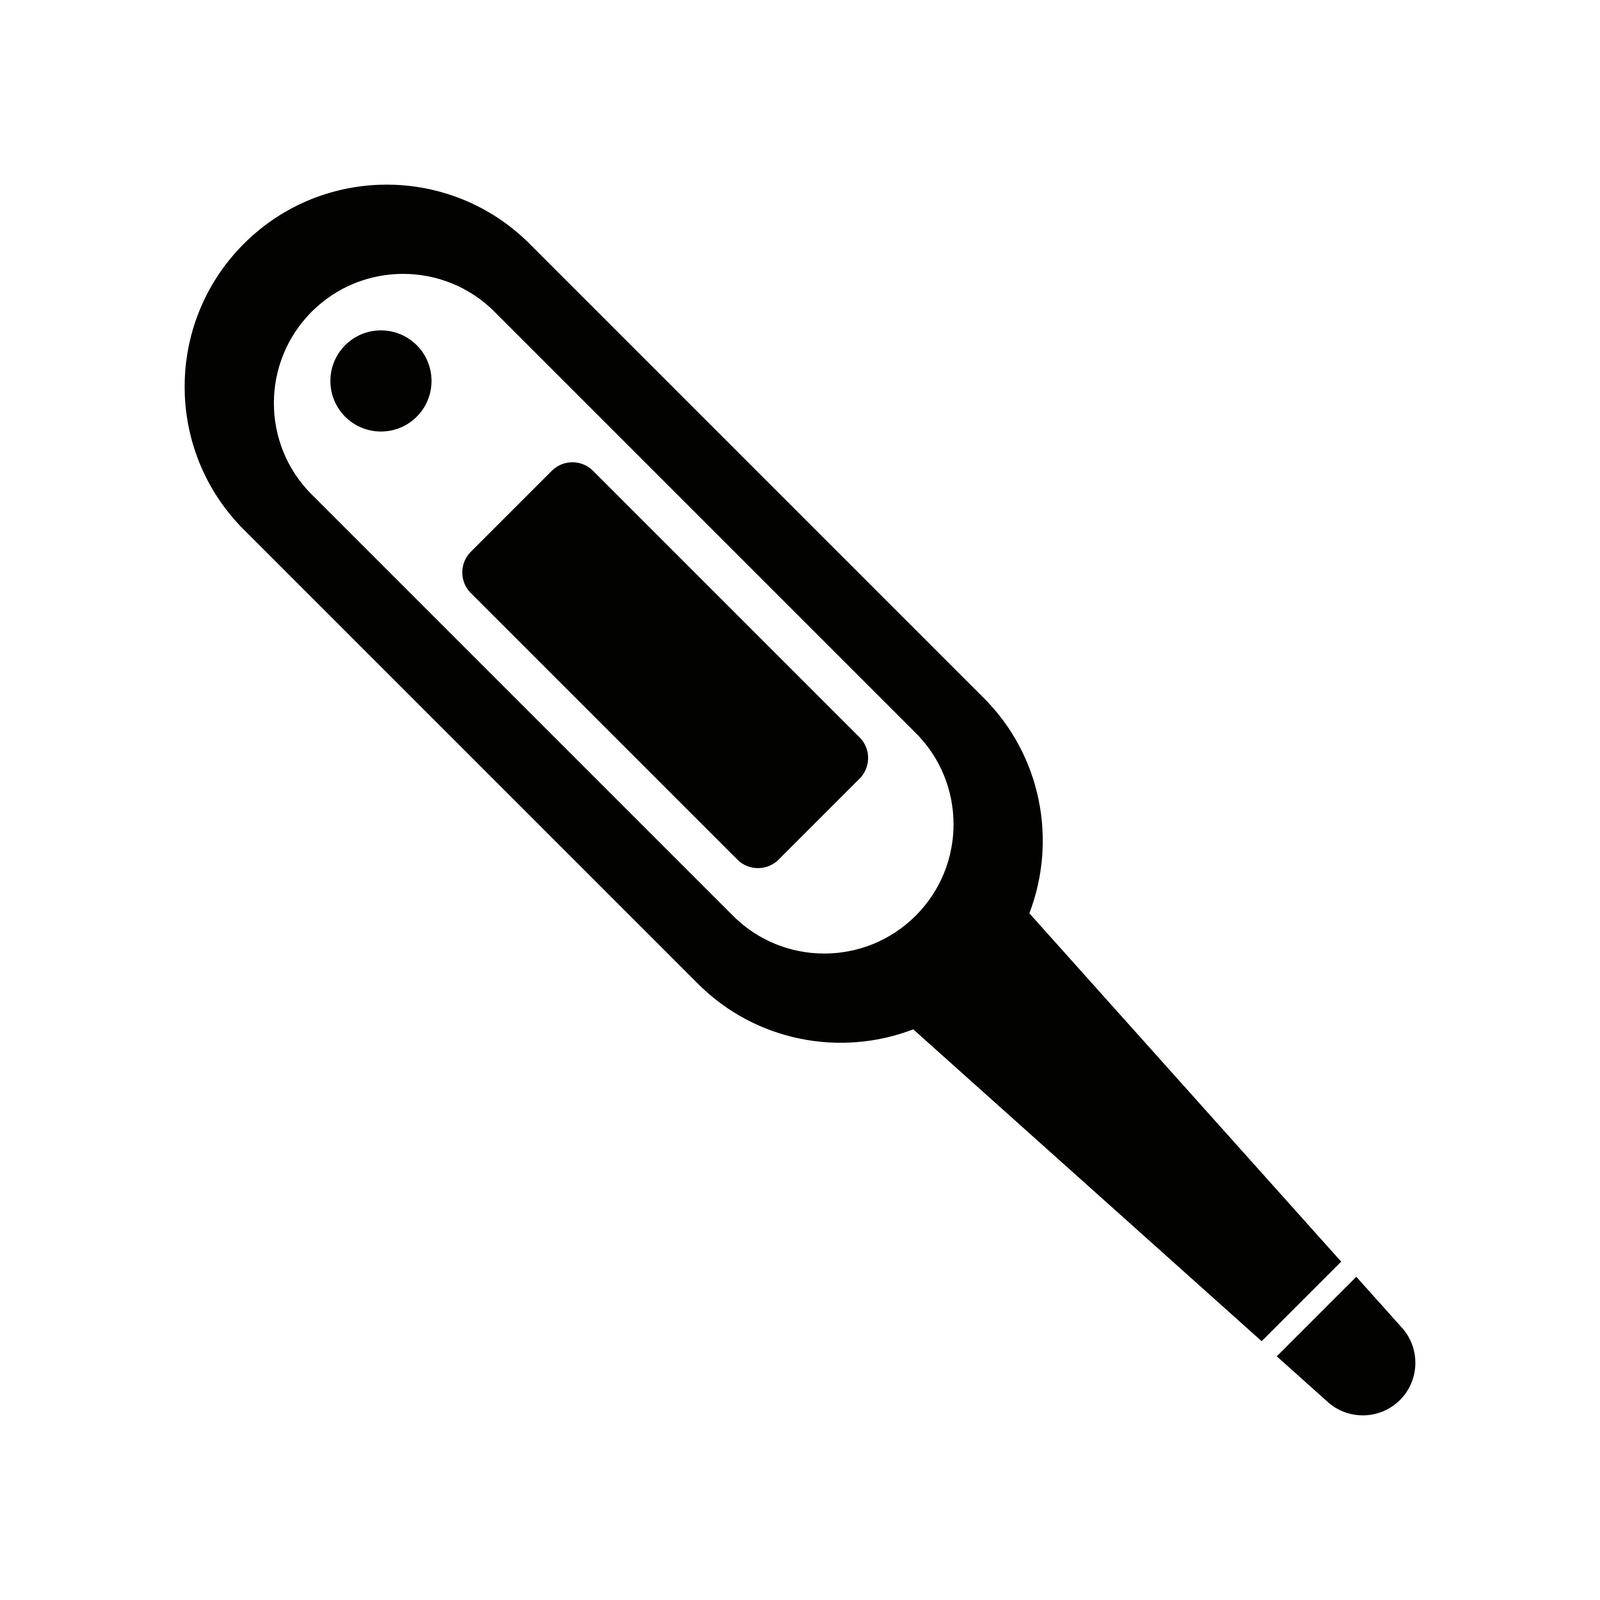 Thermometer silhouette icon. A tool for measuring body temperature. Vector. by illust_monster